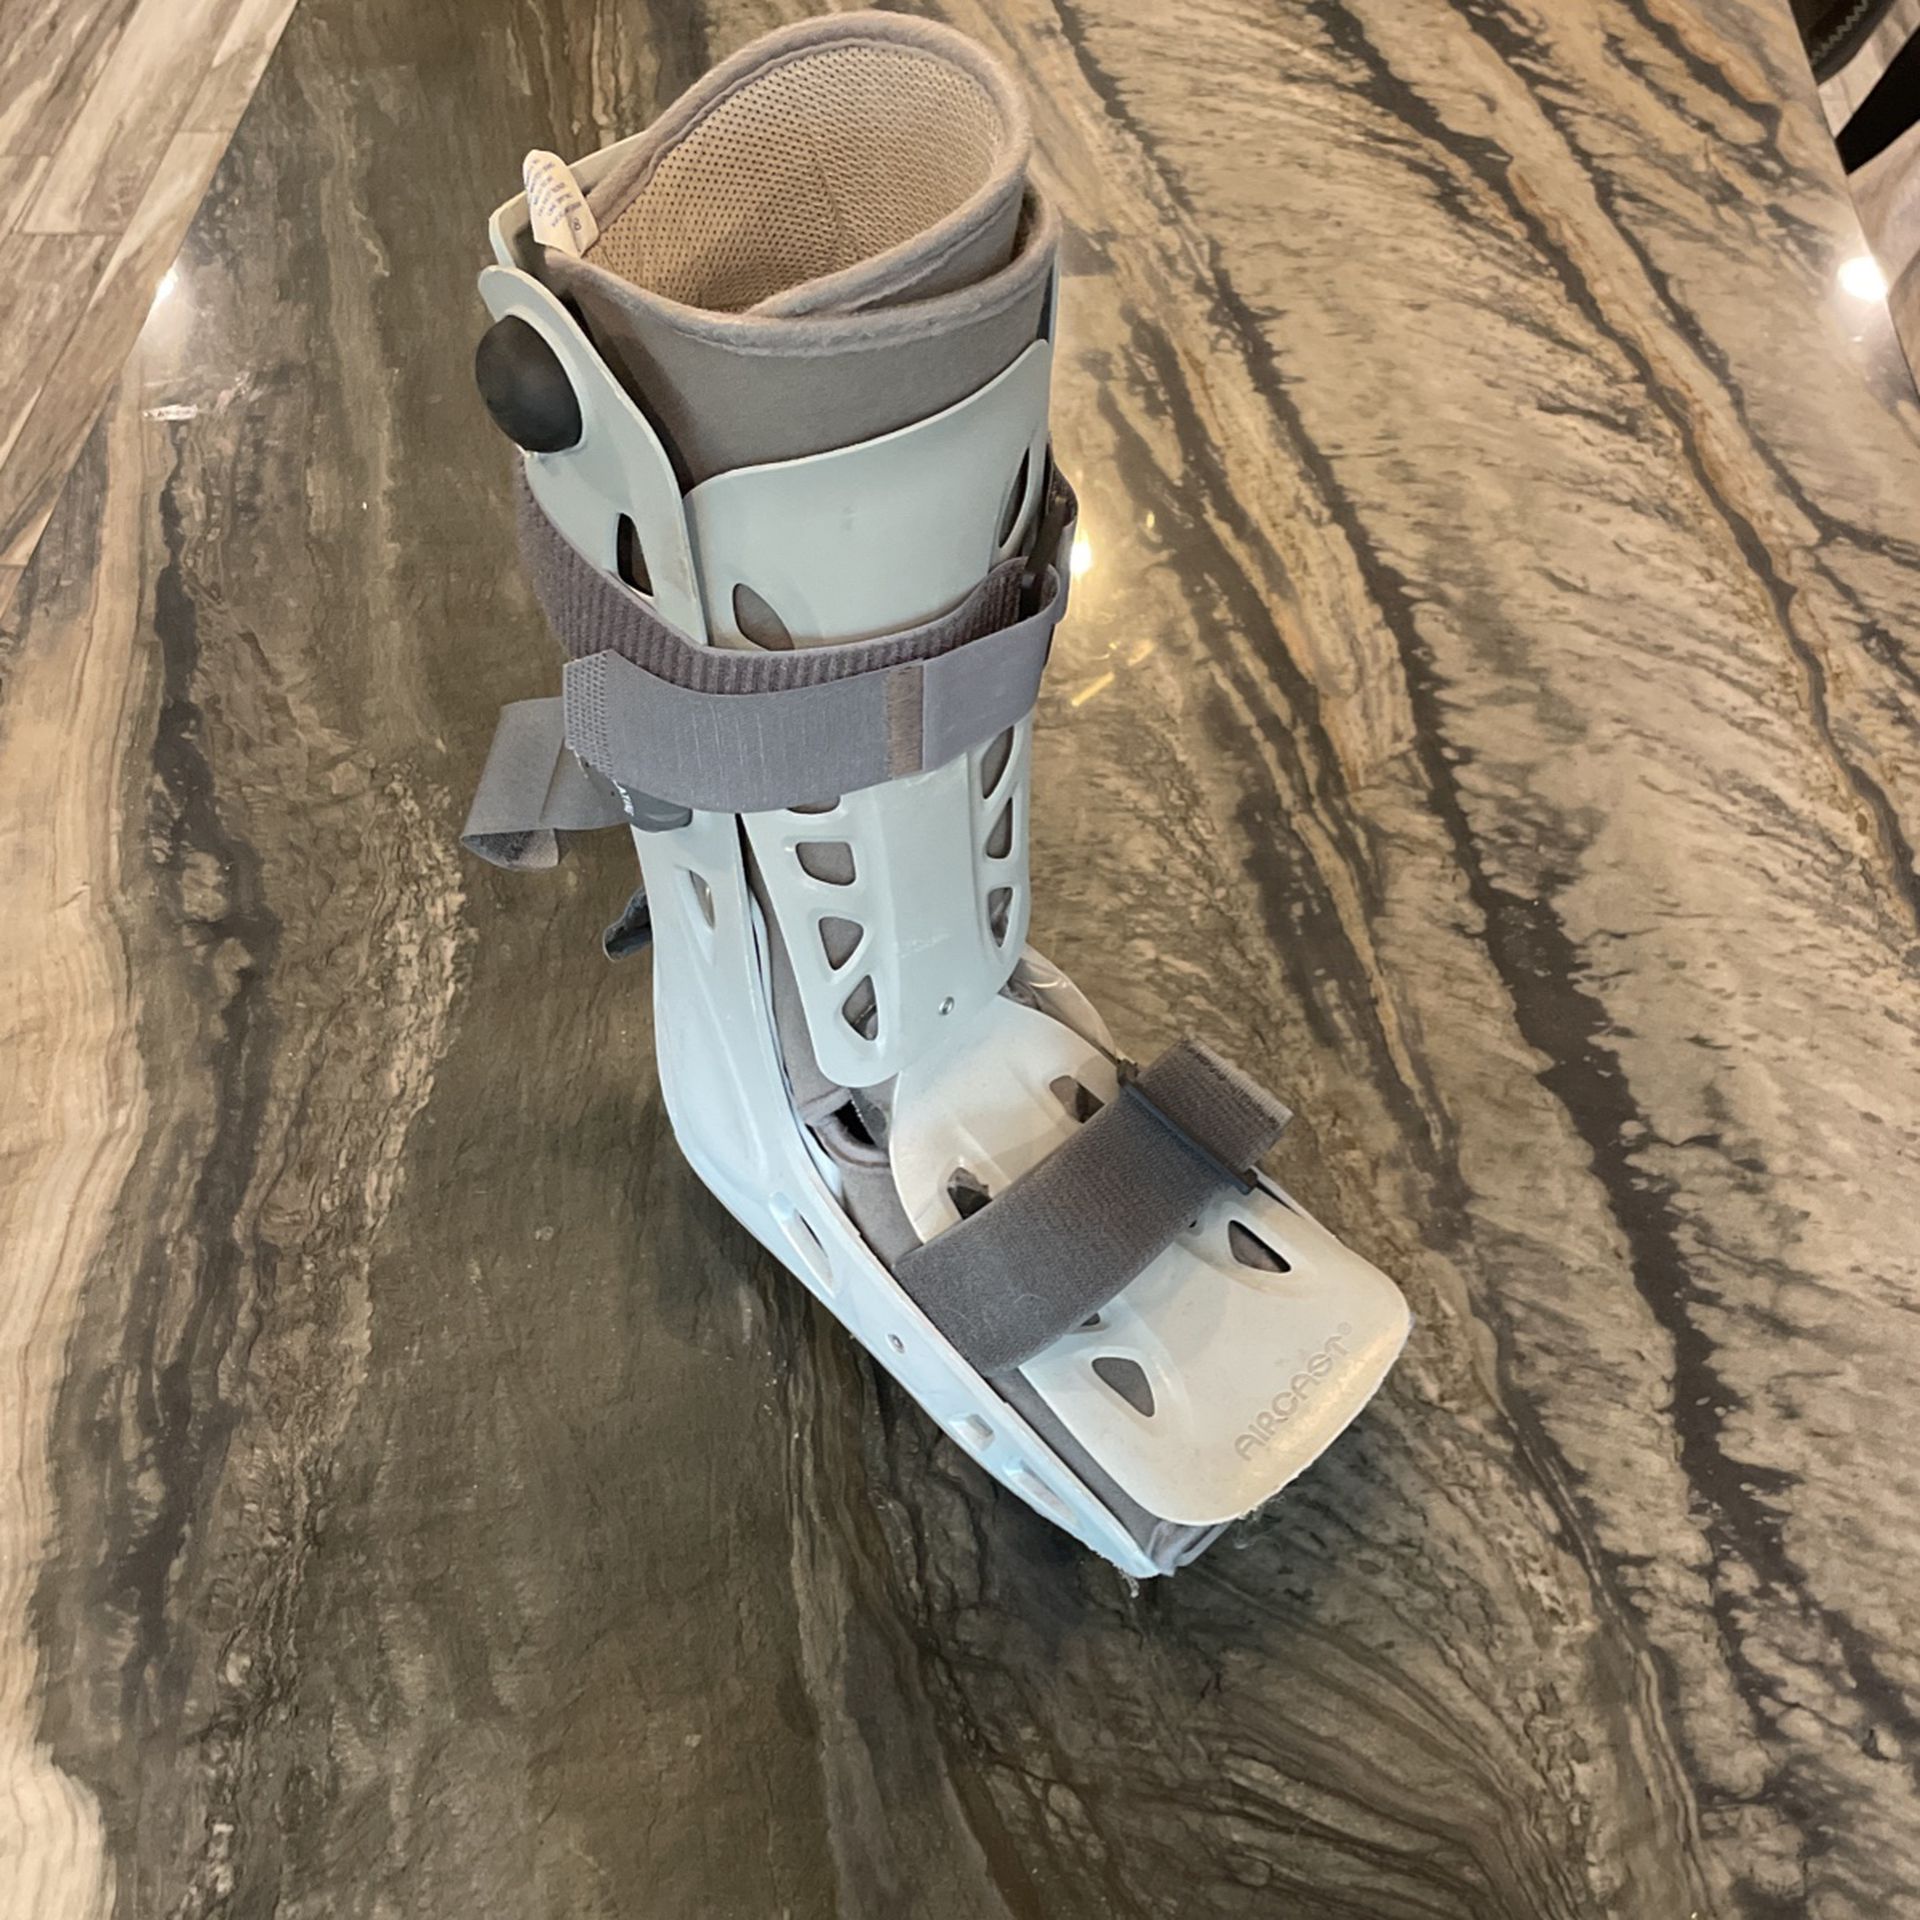 Aircast Boot - Used